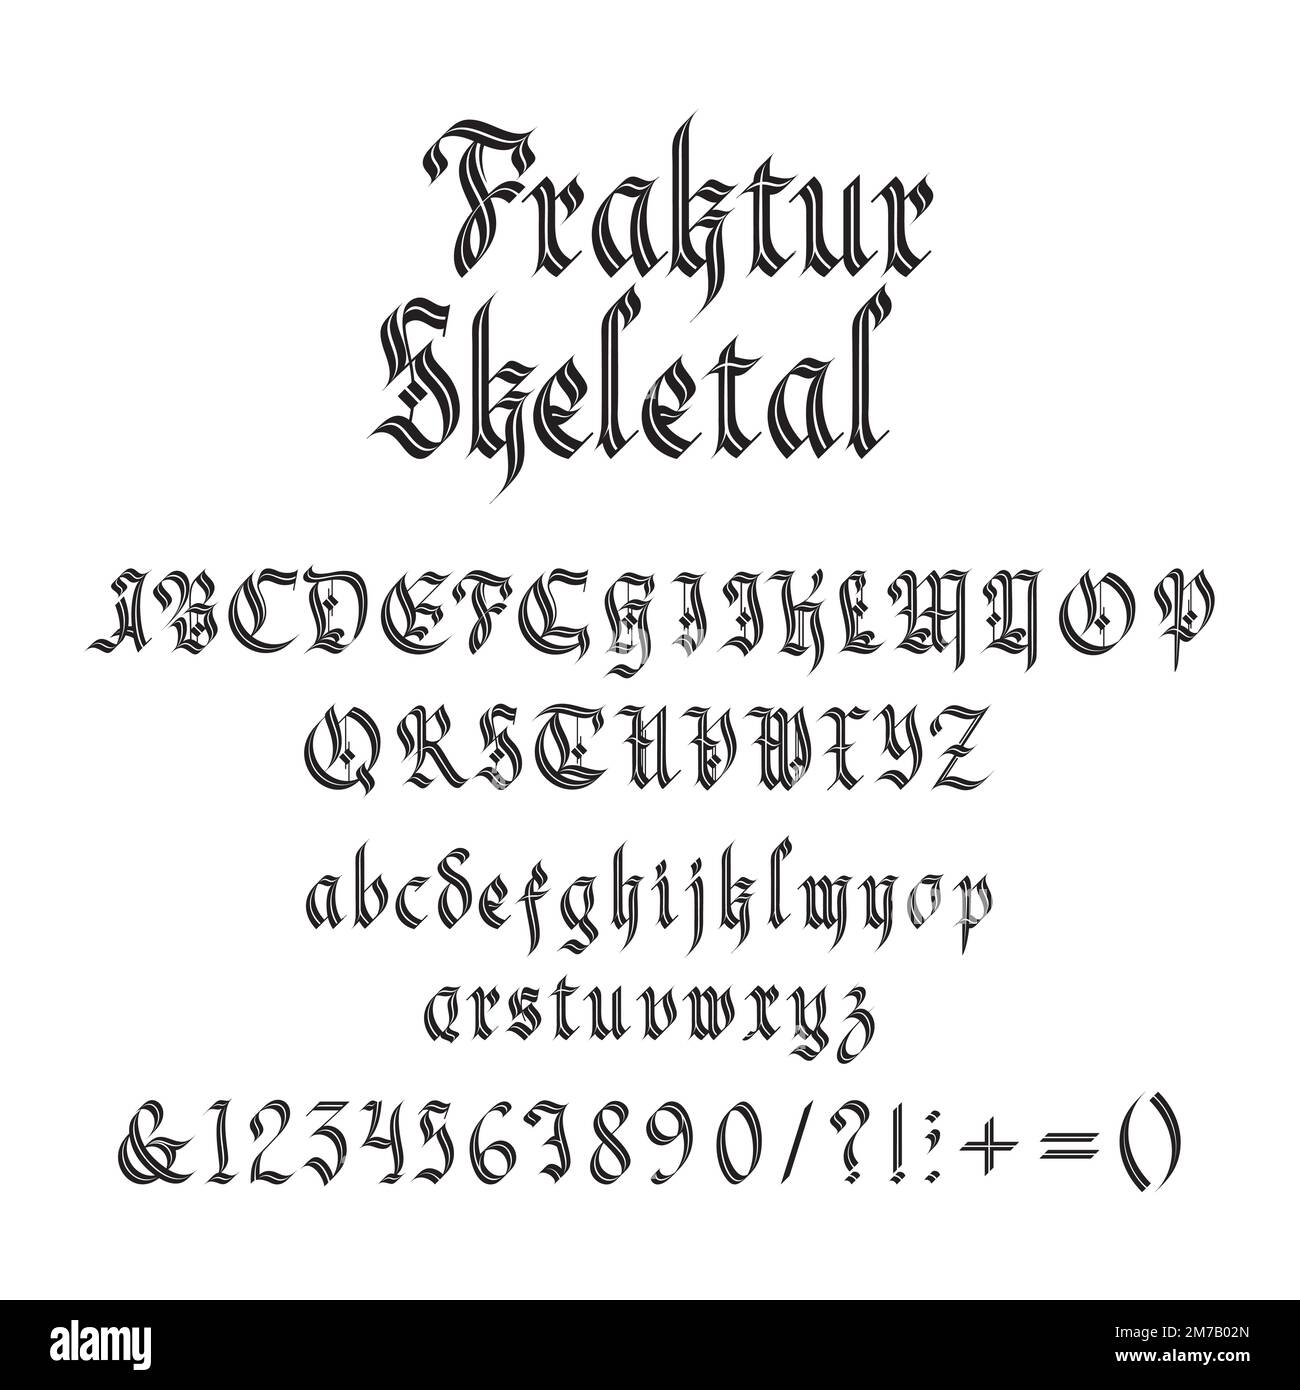 Vintage gothic font vector illustration. Set of unique decorative black capitals and lowercase calligraphic alphabet letters, numbers, symbols and signs on white for header or alcohol label design Stock Vector